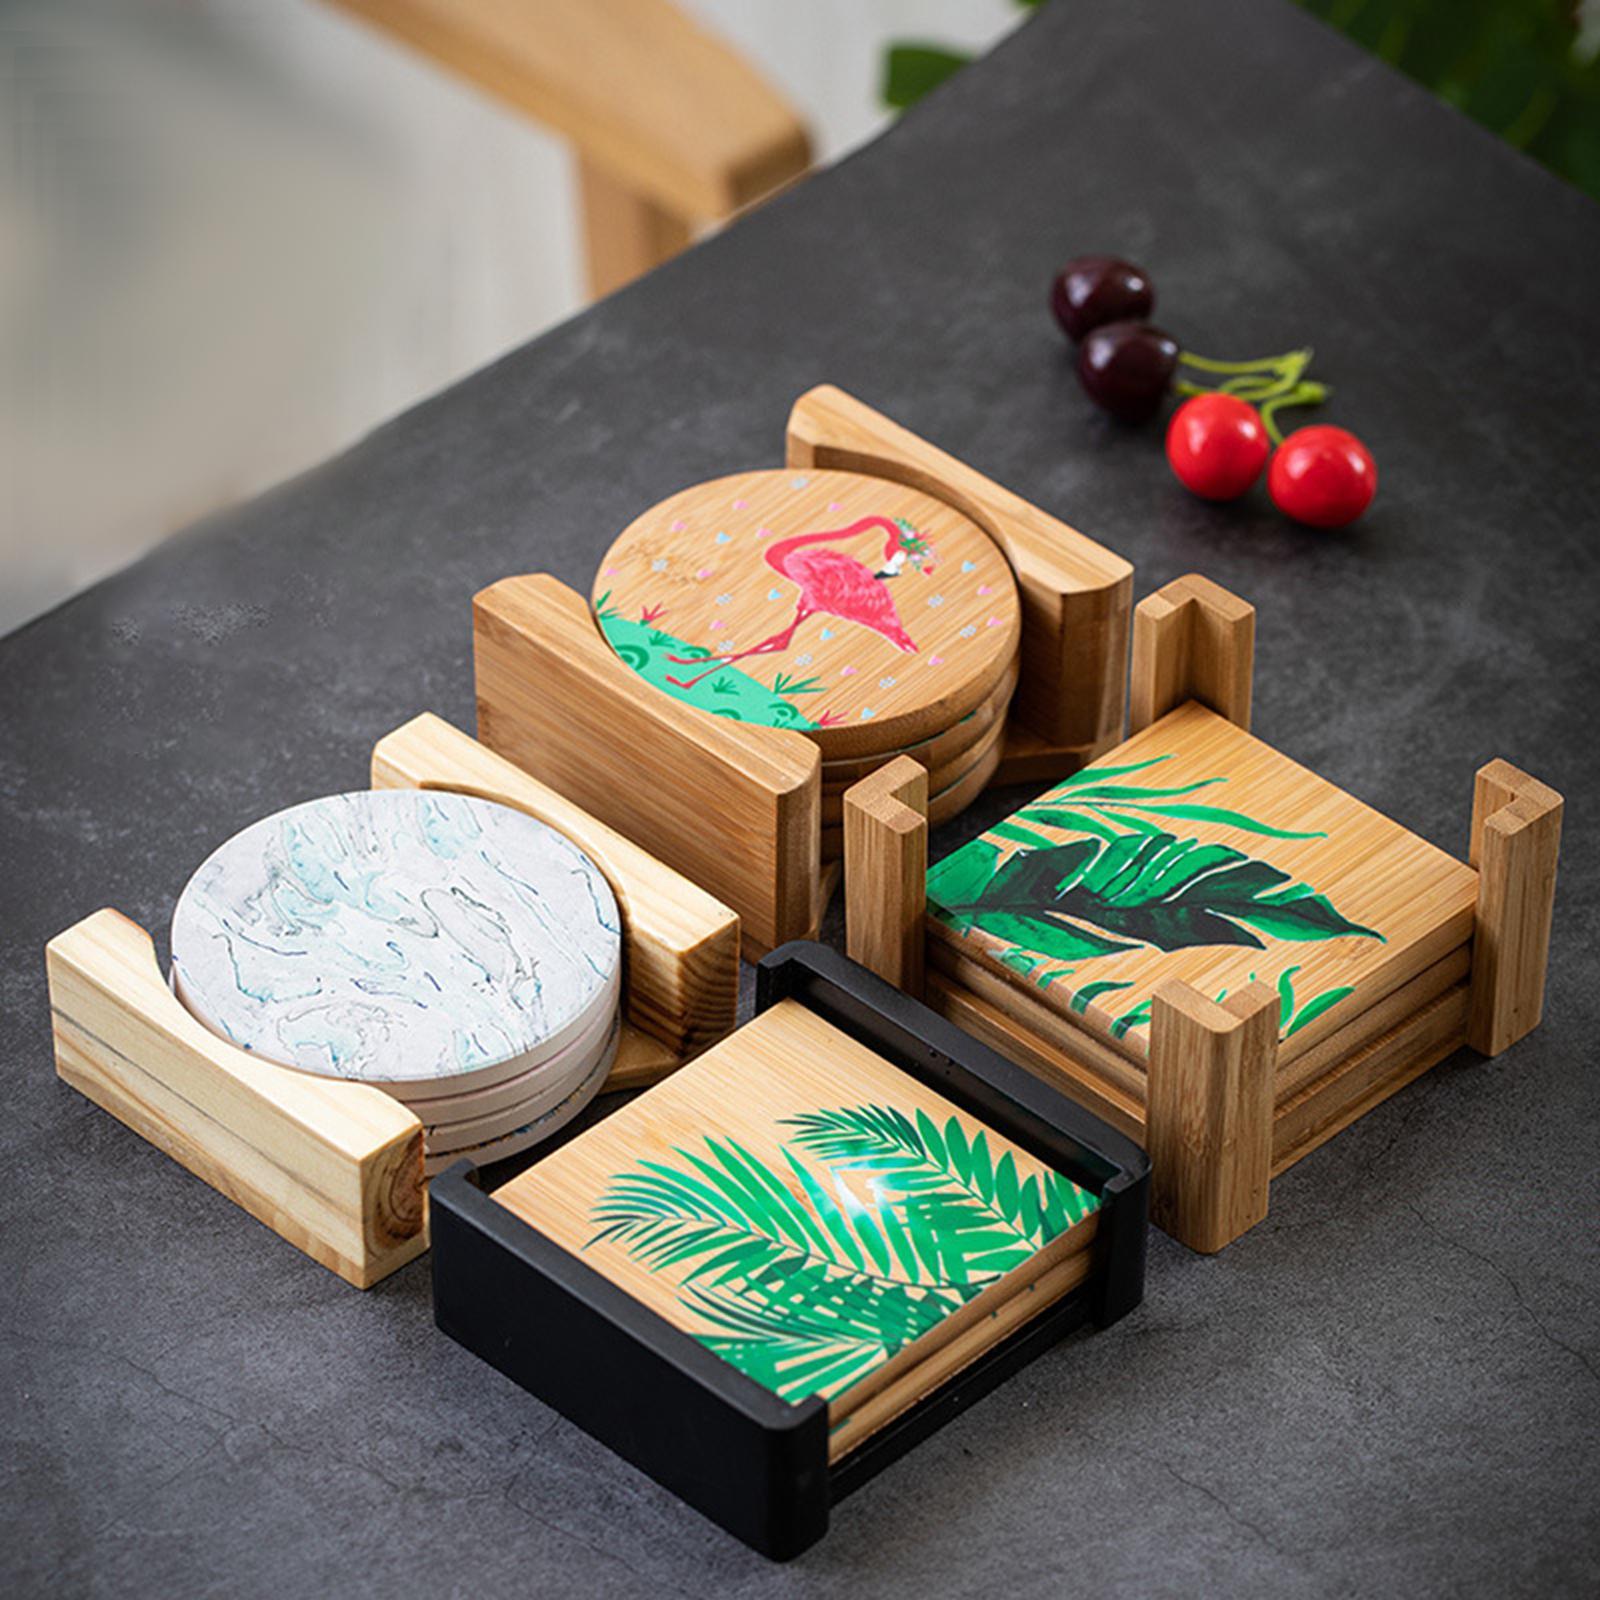 Coaster Holder Wooden Housewarming Gifts for Home Desktop Apartment A